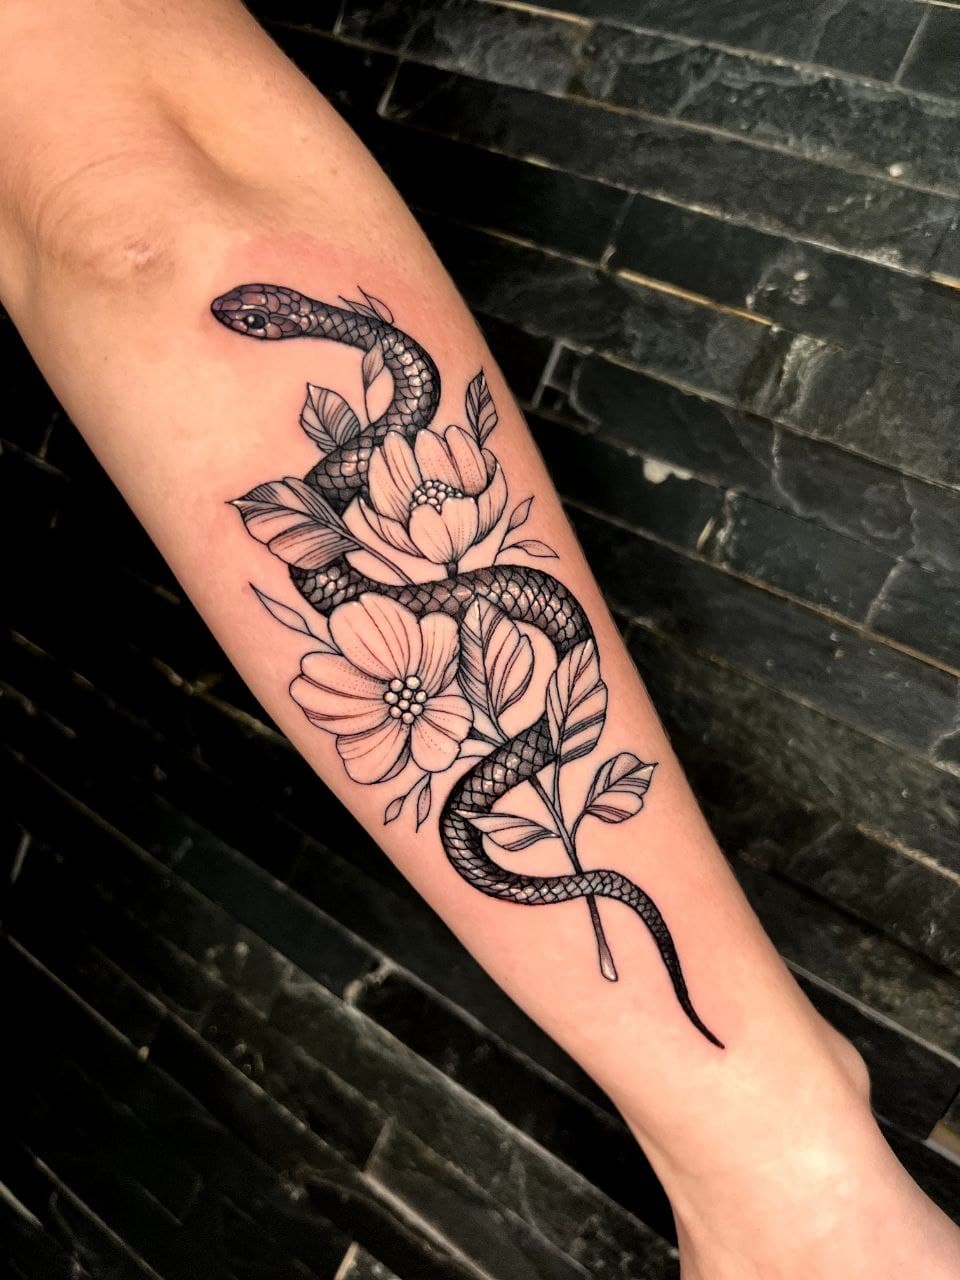 Recently got my first tattoo! On my inner forearm. Am I overthinking the  placement of it? : r/tattooadvice